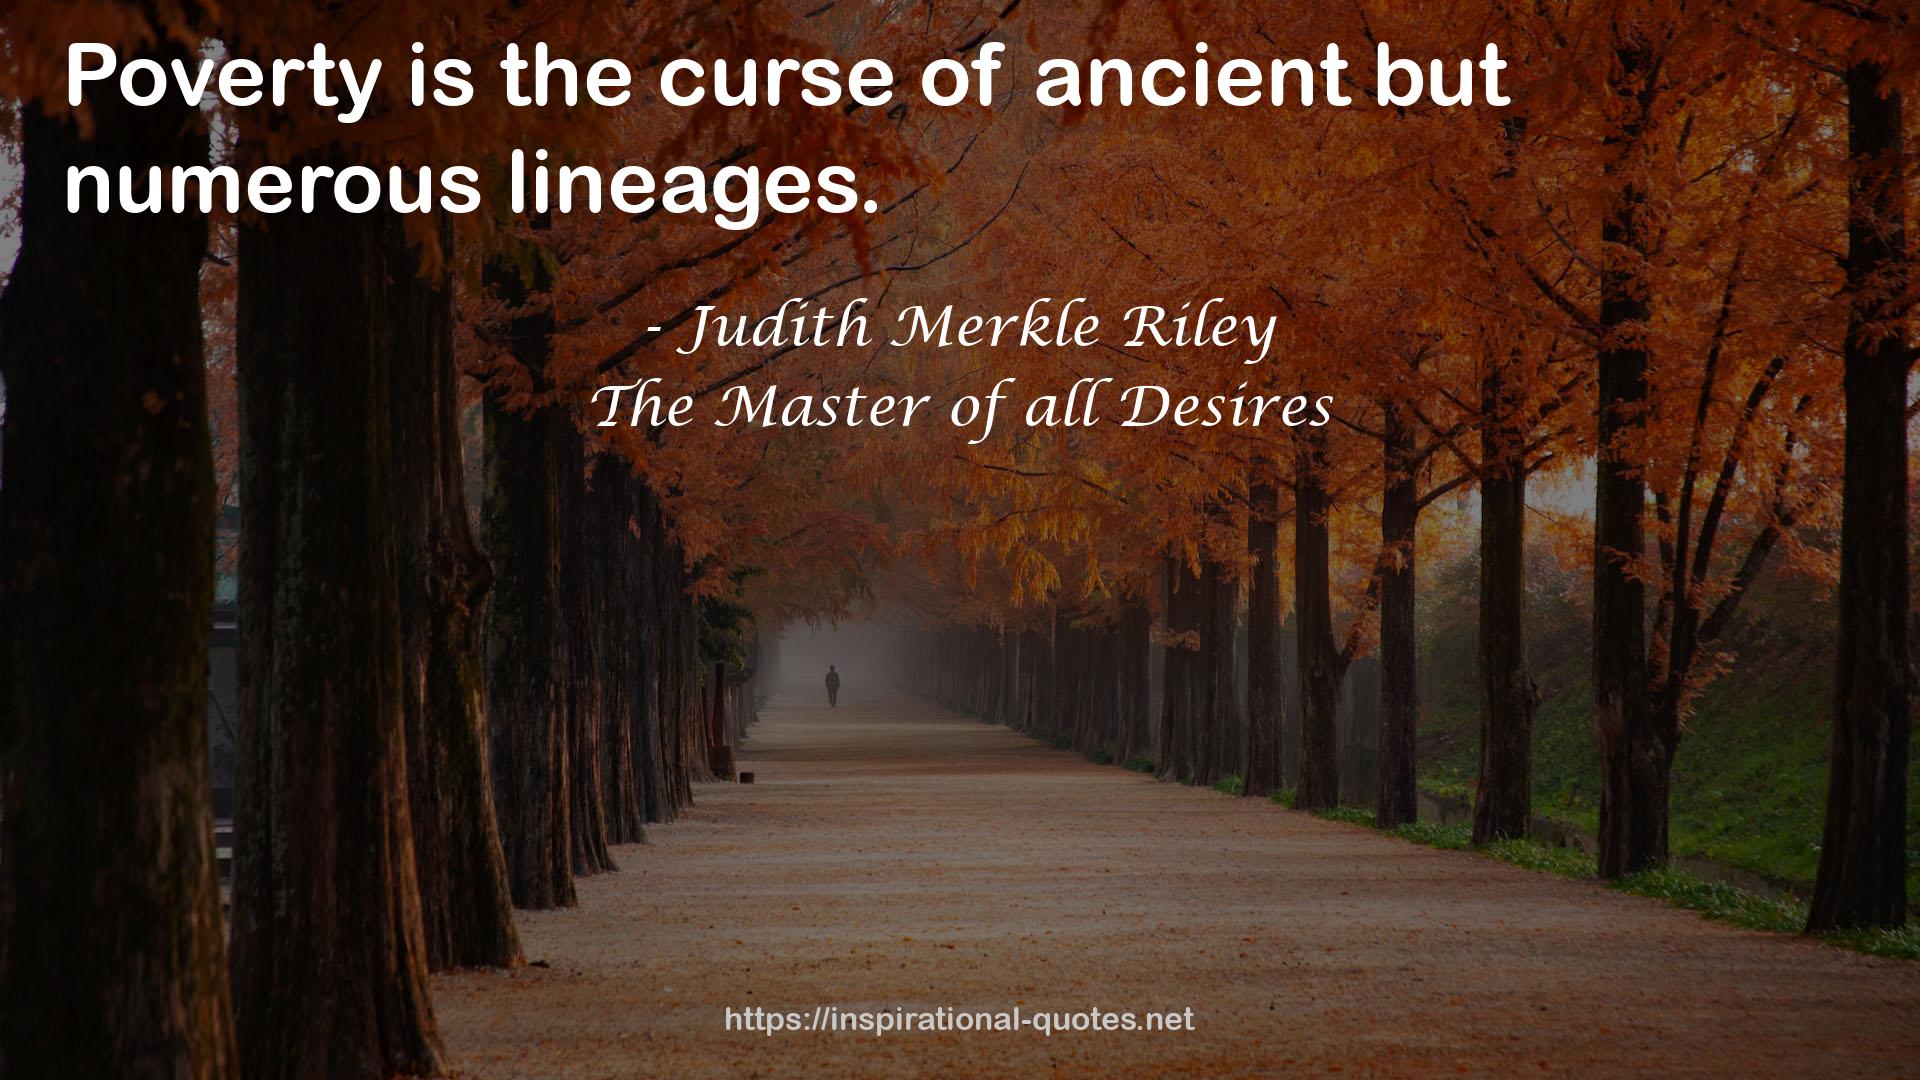 The Master of all Desires QUOTES